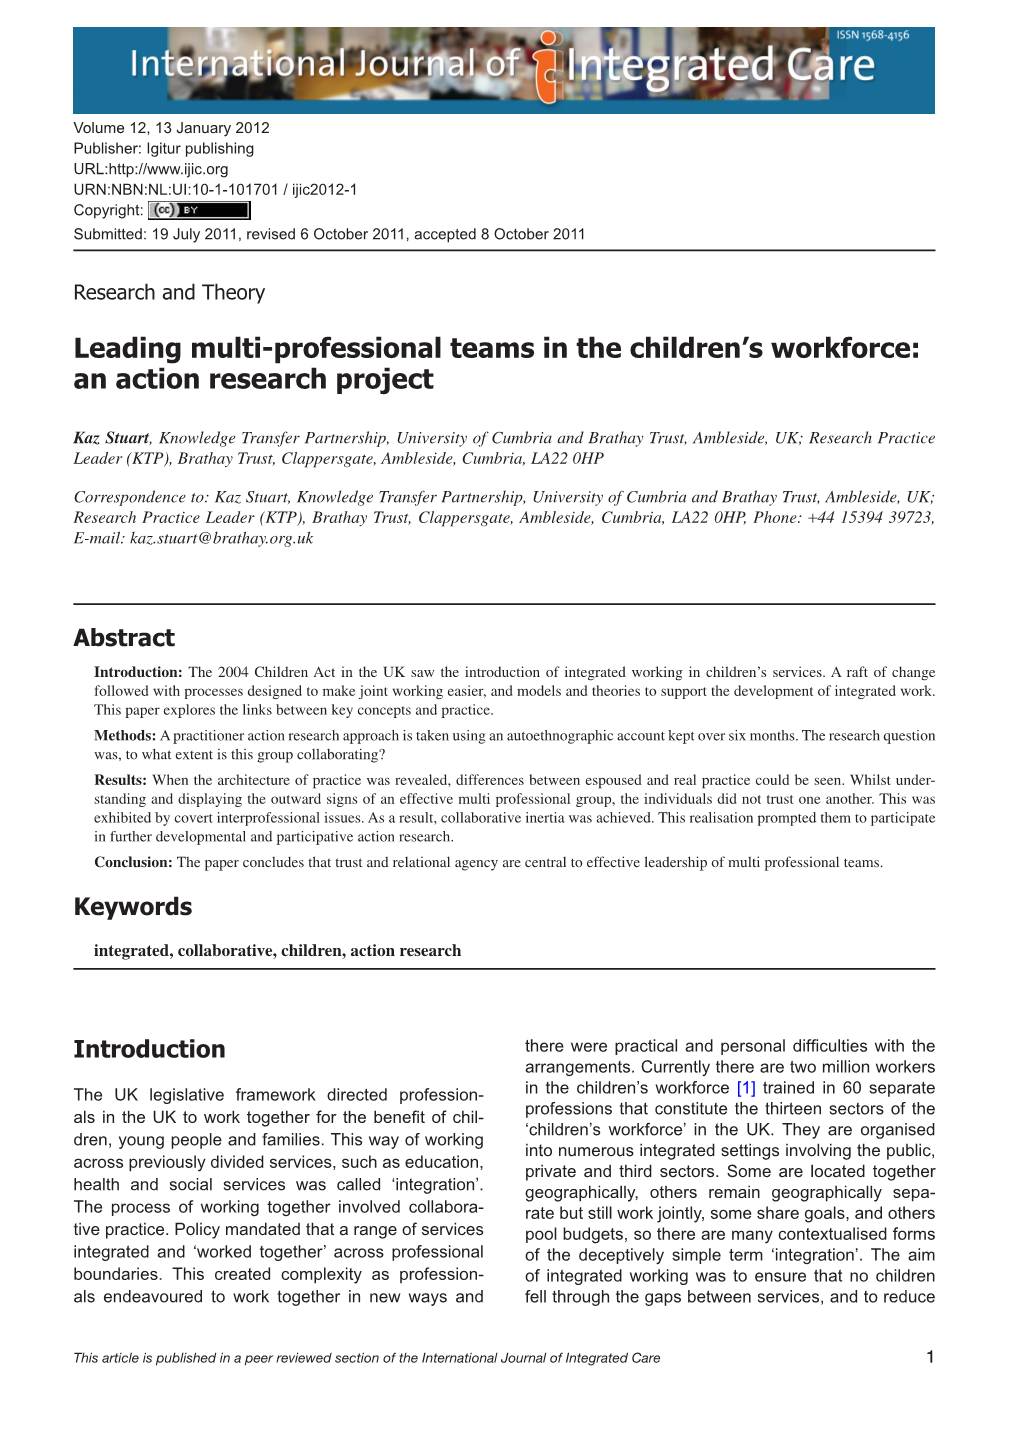 Leading Multi-Professional Teams in the Children's Workforce: an Action